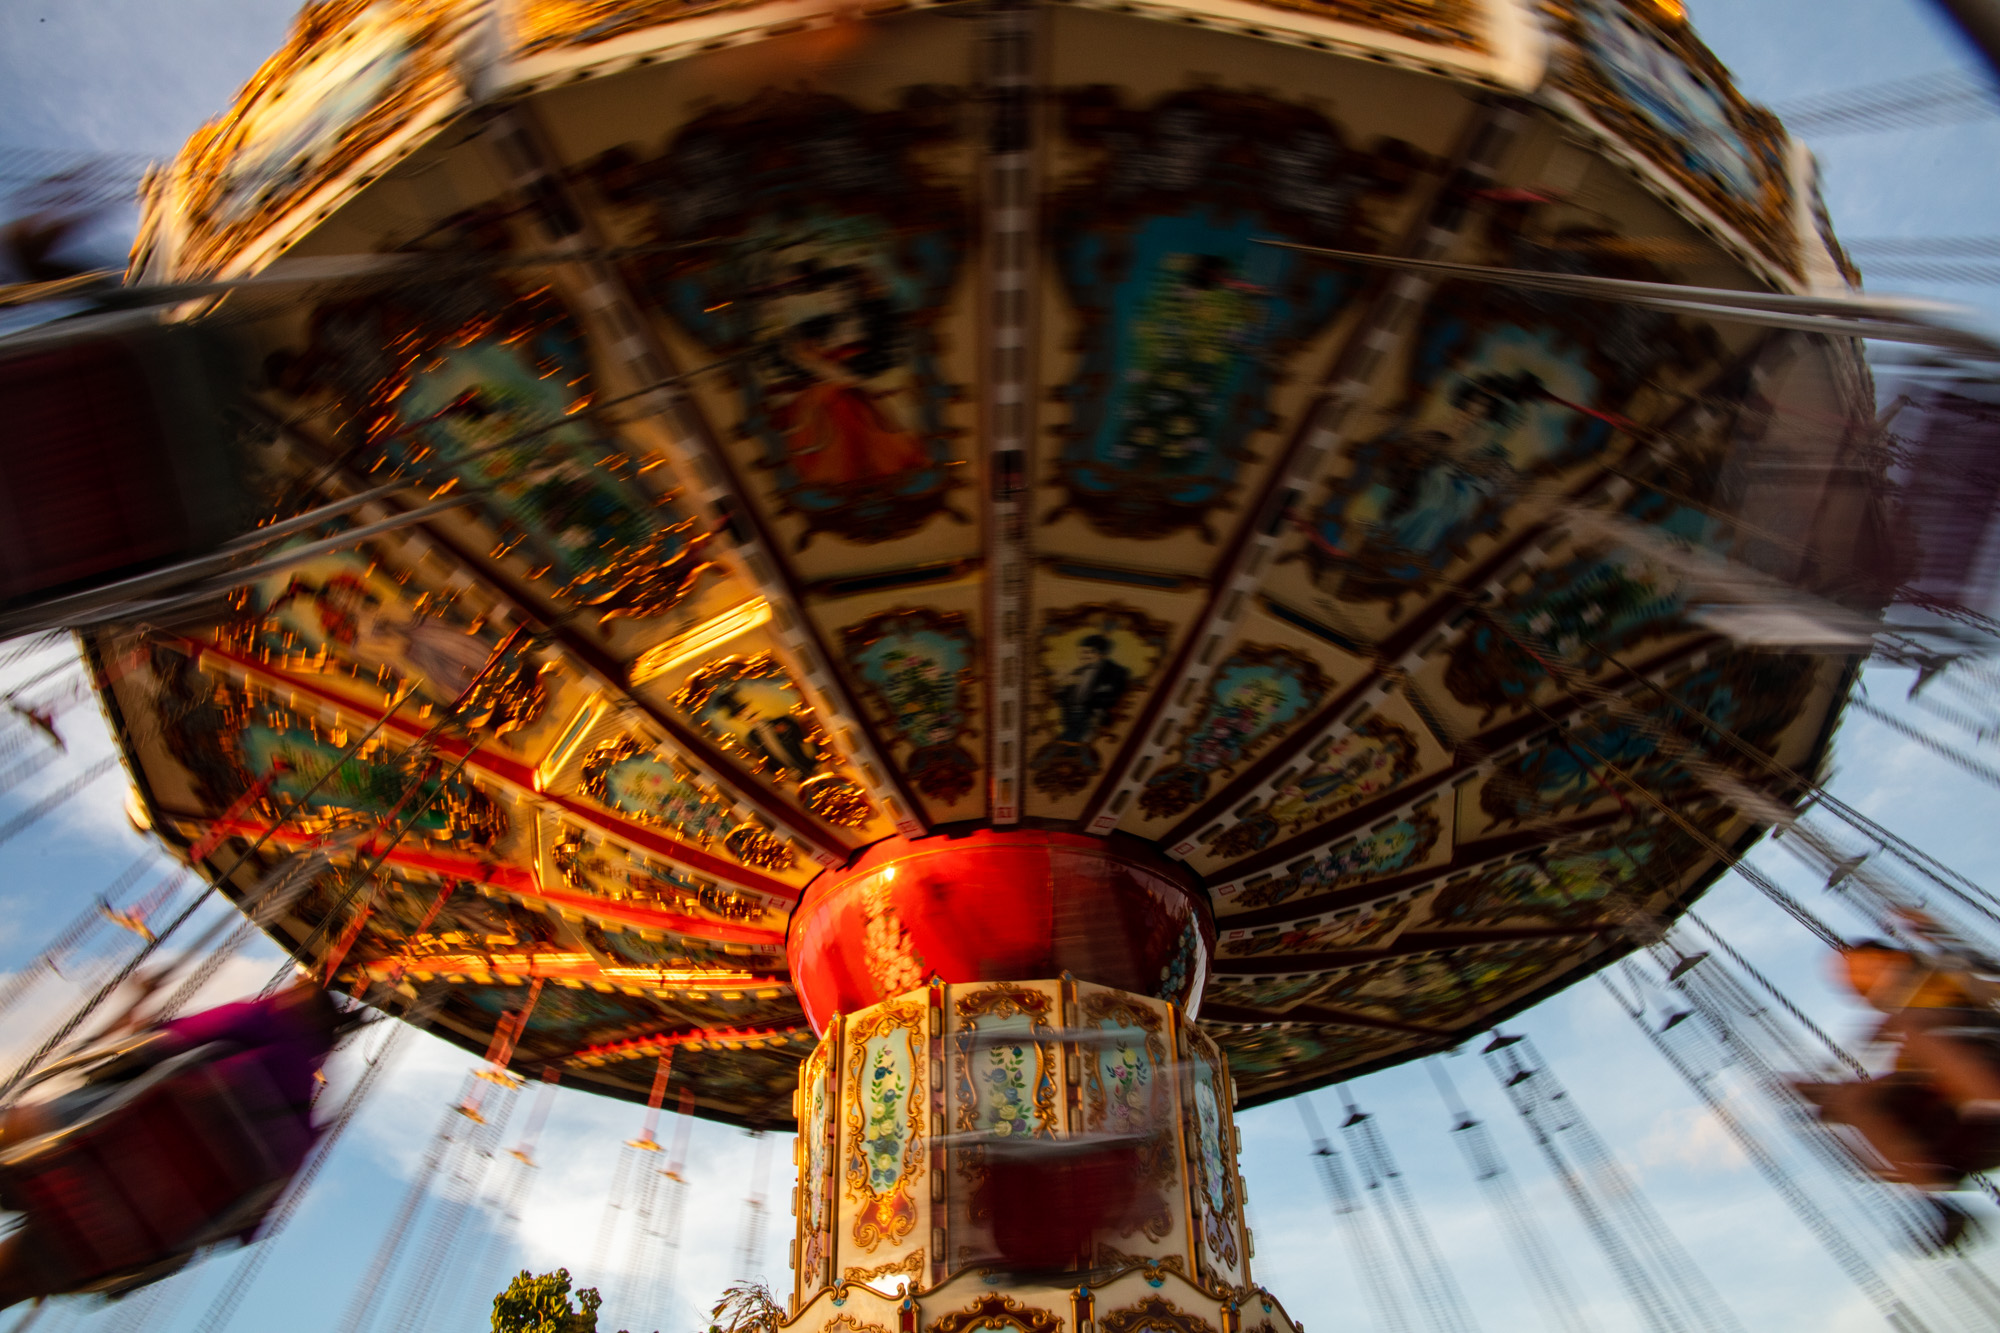 The spin of the chairoplane IV